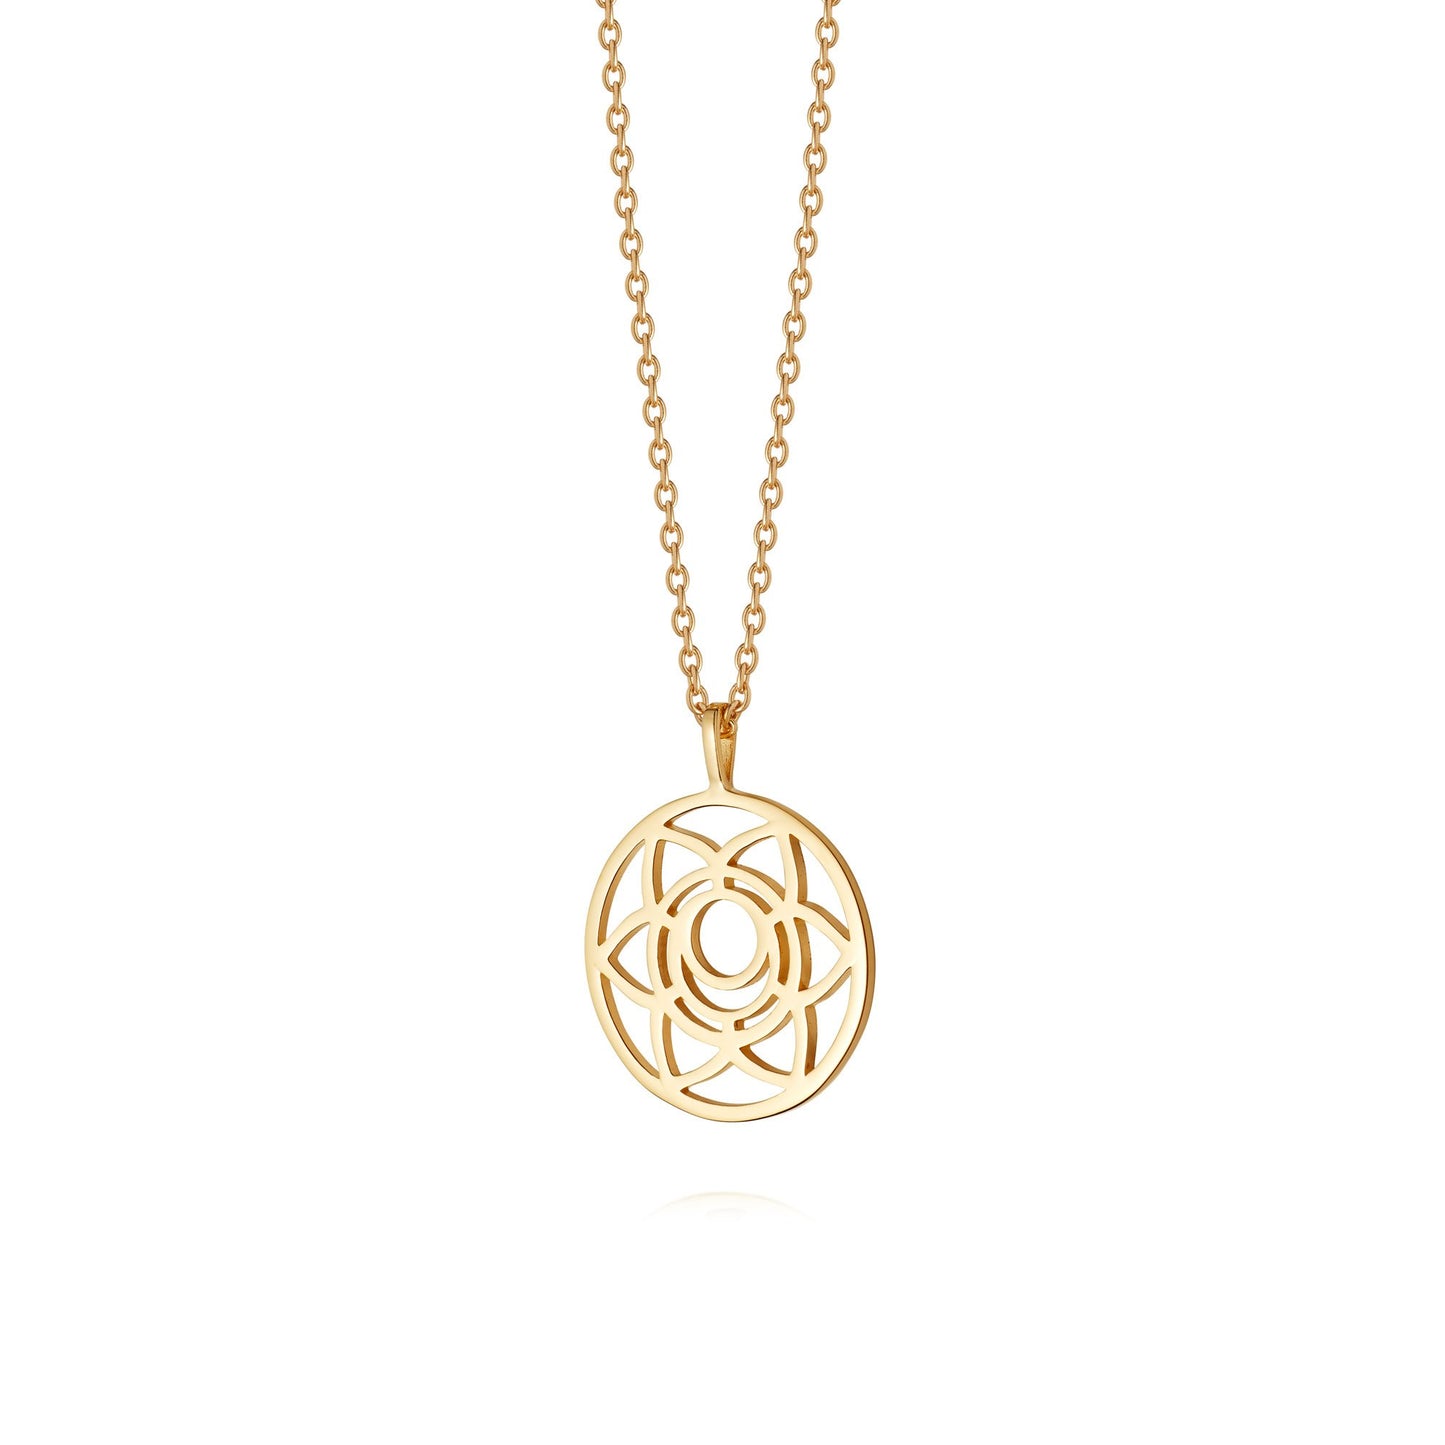 SACRAL CHAKRA NECKLACE 18ct Gold Plate NCHK4002